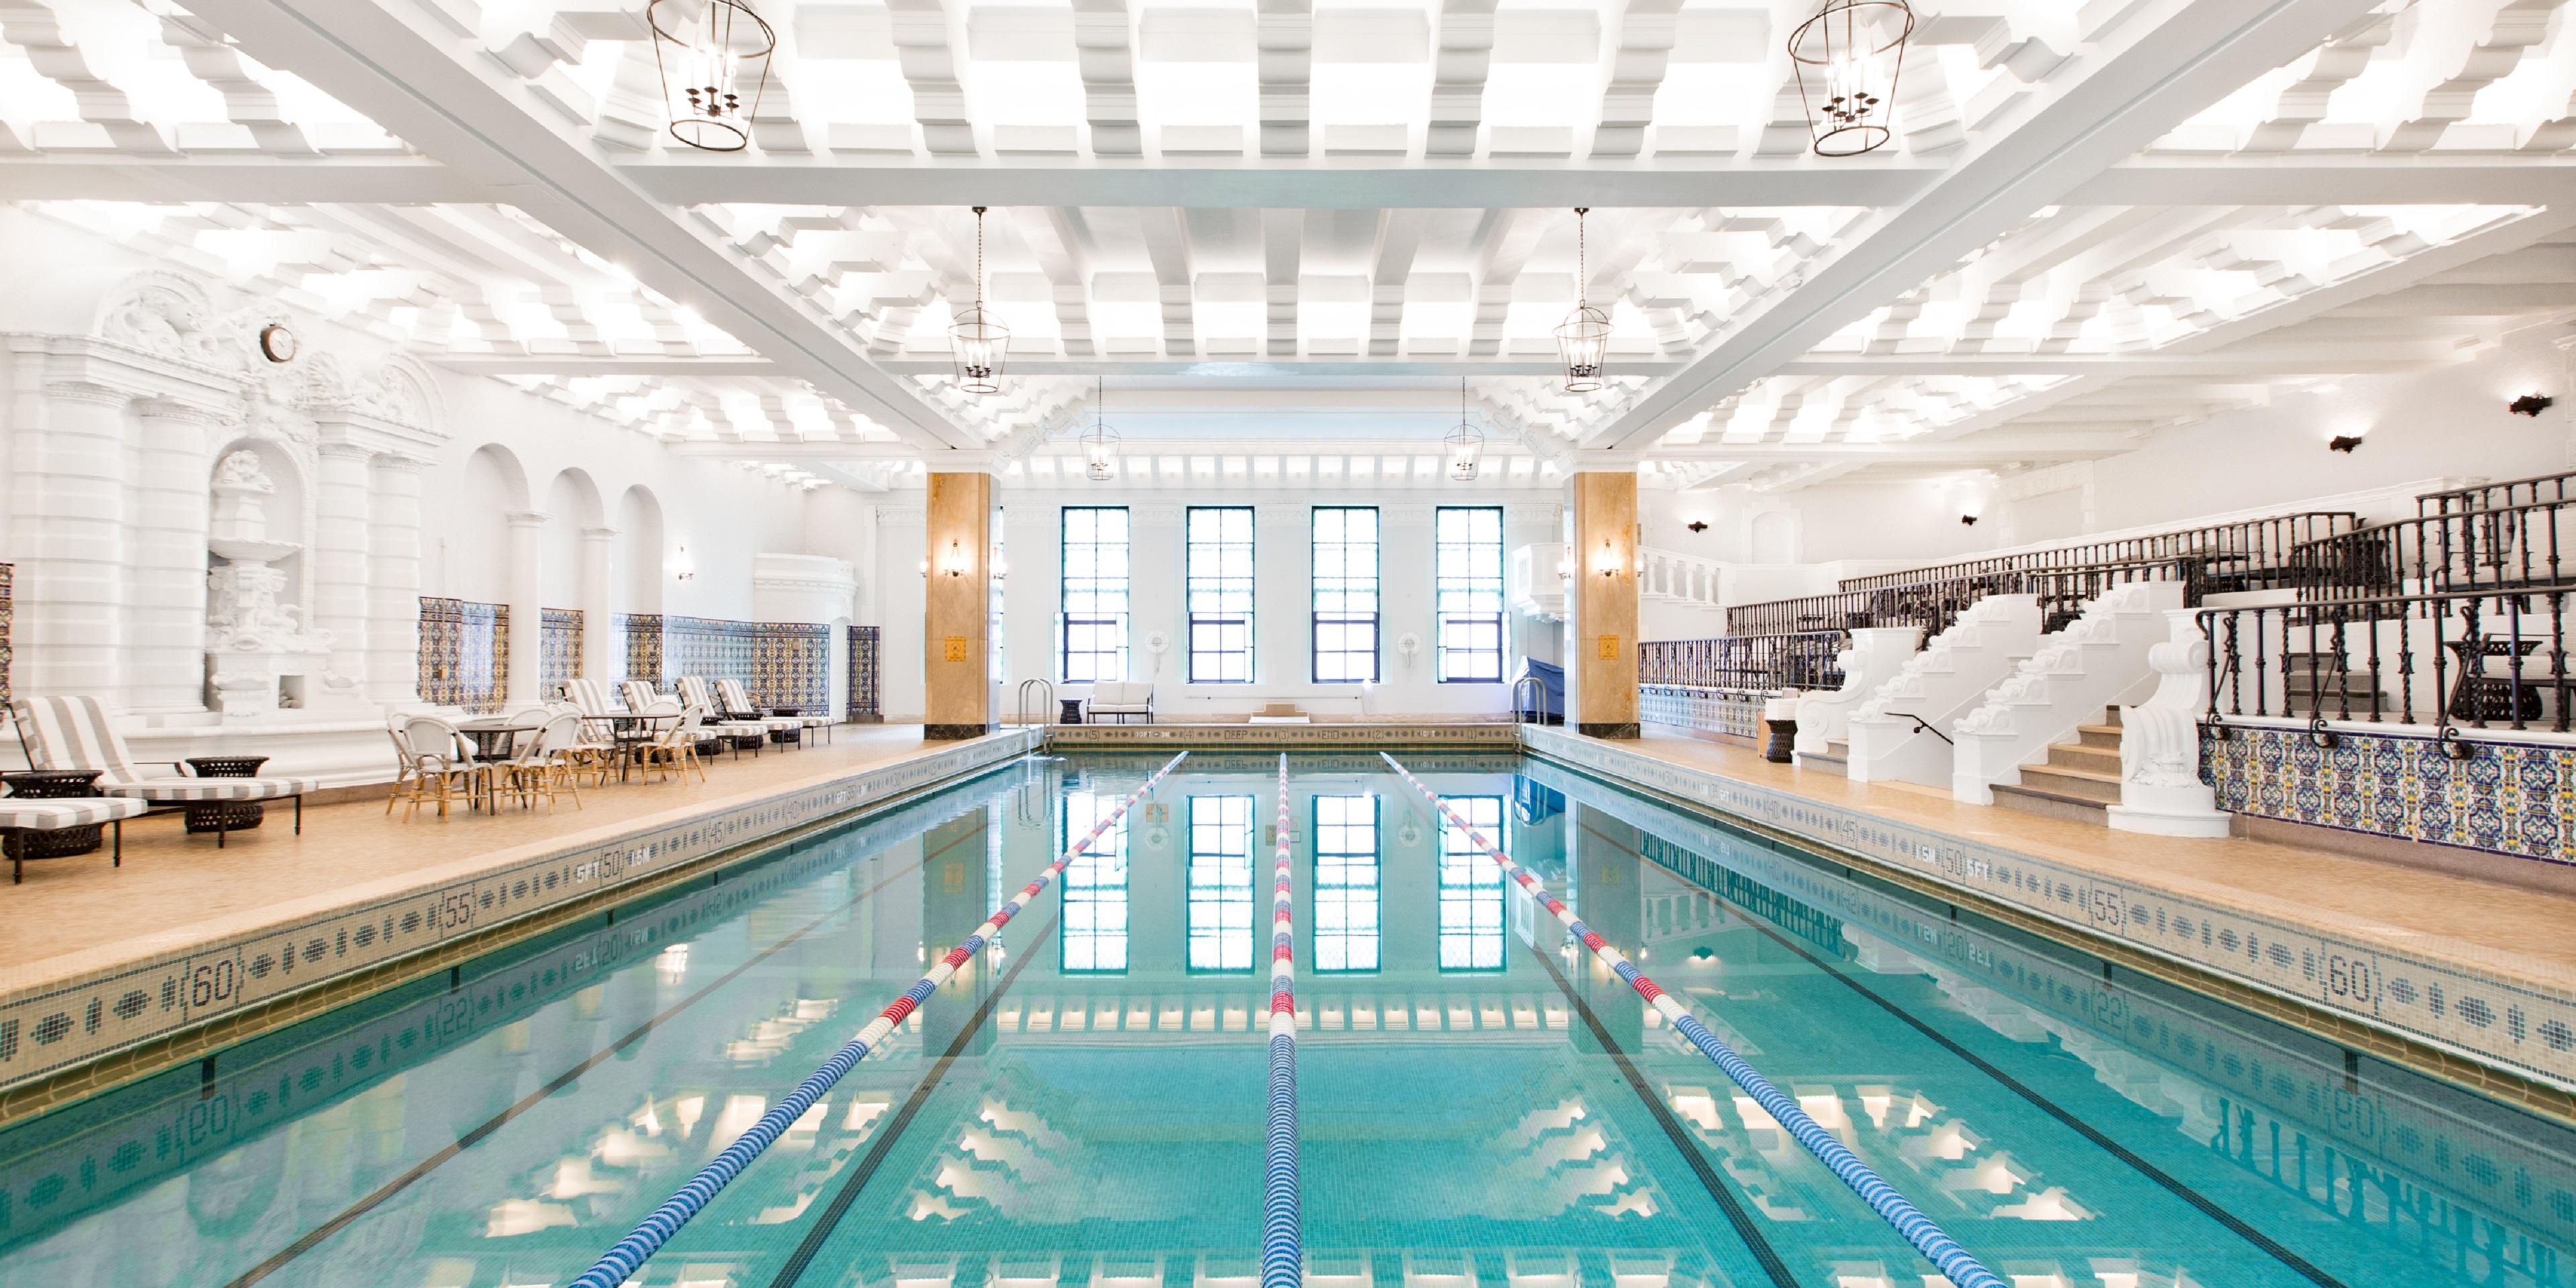 Downtown Chicago’s most tranquil wellness escape, our beautiful spa, spans three stories and includes private treatment rooms, two Finnish saunas, and a premier fitness center. Swim 14 stories above the Magnificent Mile in our historic indoor Olympic swimming pool, featuring its original 1920s Spanish tiles and a terra cotta Neptune fountain.